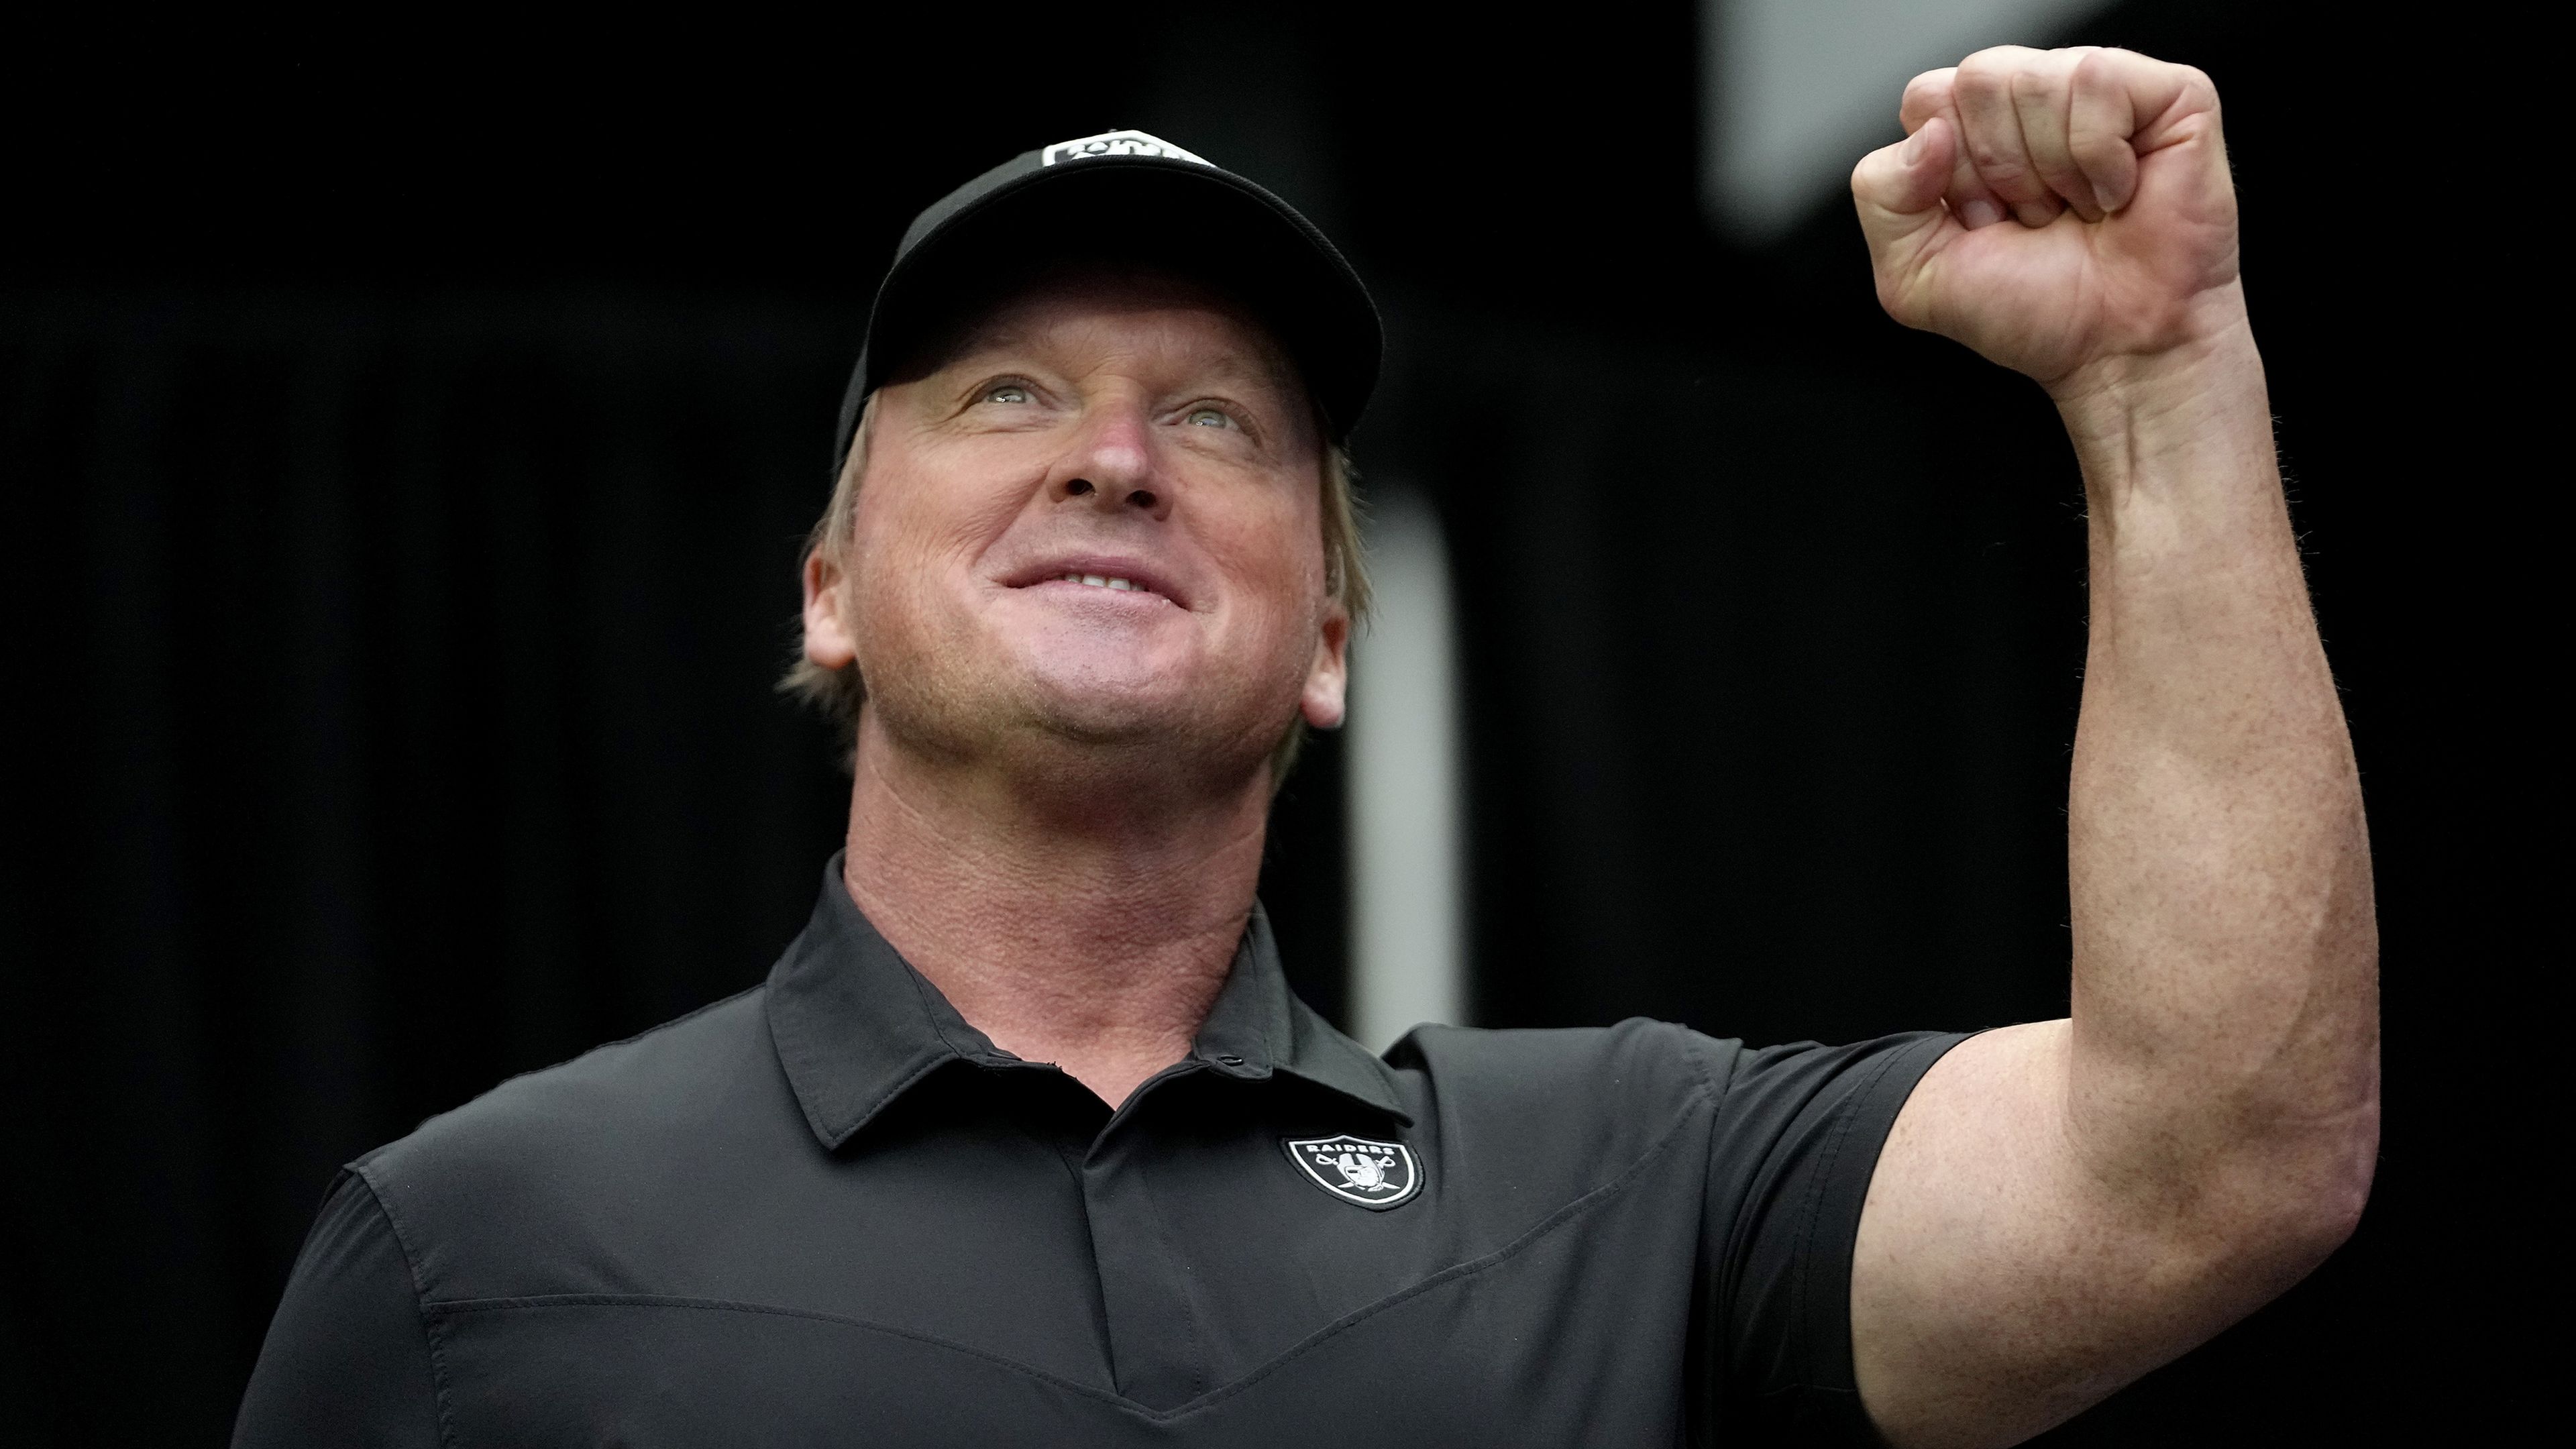 Fallout continues from Jon Gruden's resignation over 'abhorrent' emails